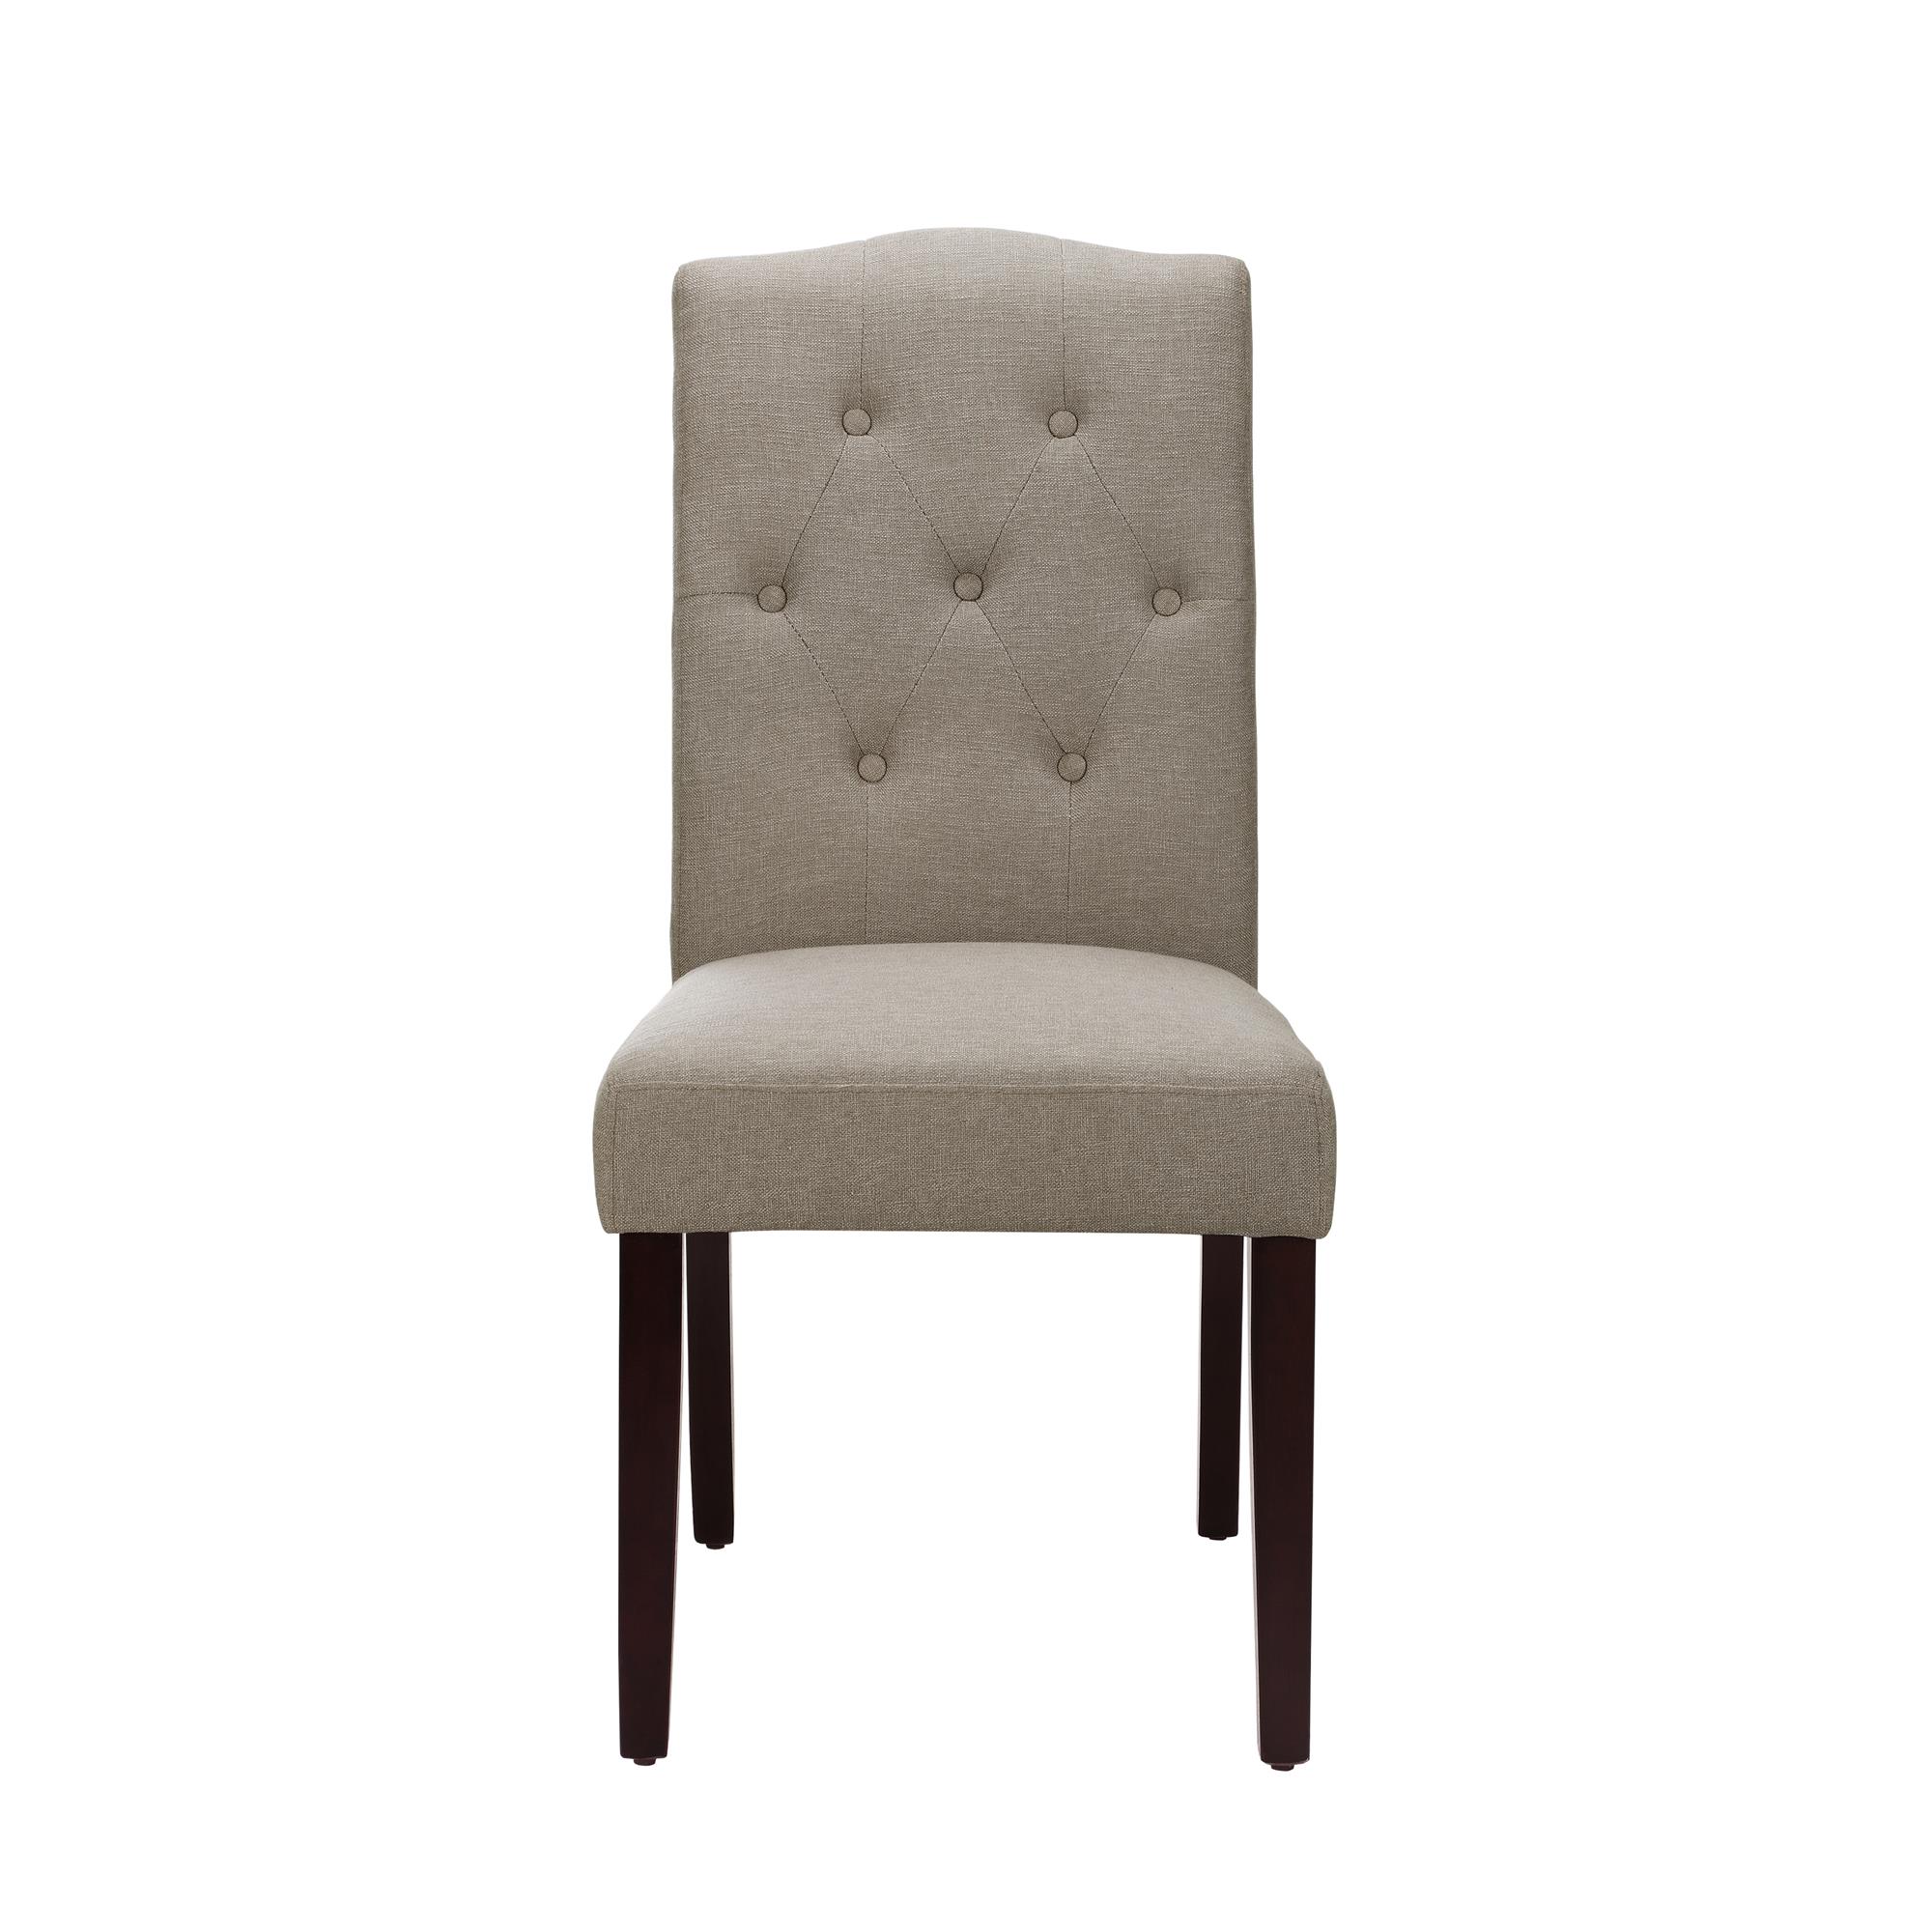 Better Homes and Gardens Parsons Upholstered Tufted Dining Chair,Taupe - image 3 of 9